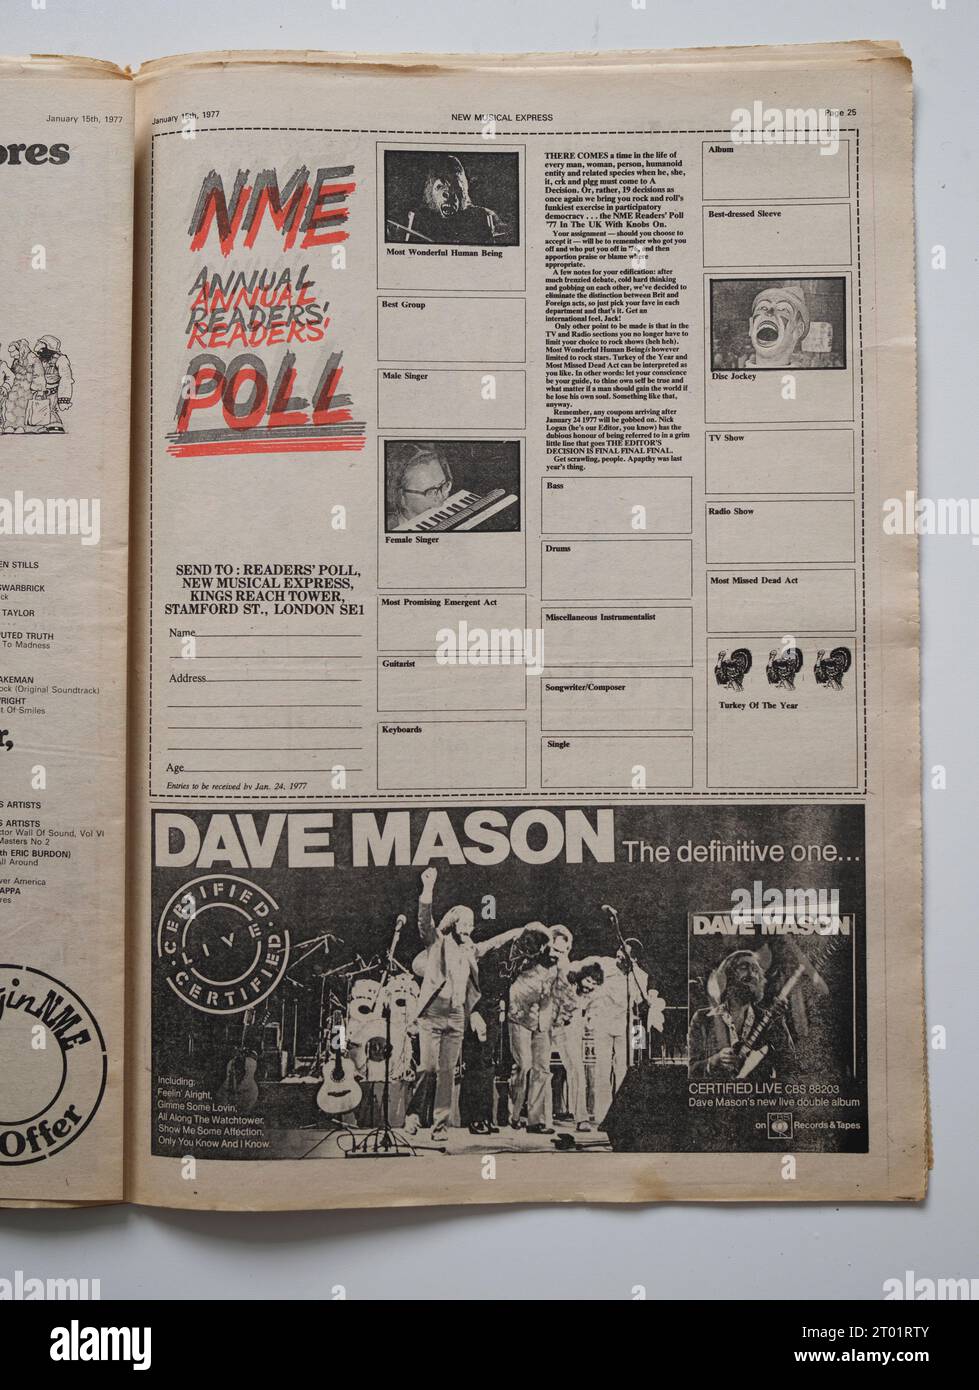 Advert for Annual Readers Poll in 1970s issue of NME New Musical Express Music Paper Stock Photo